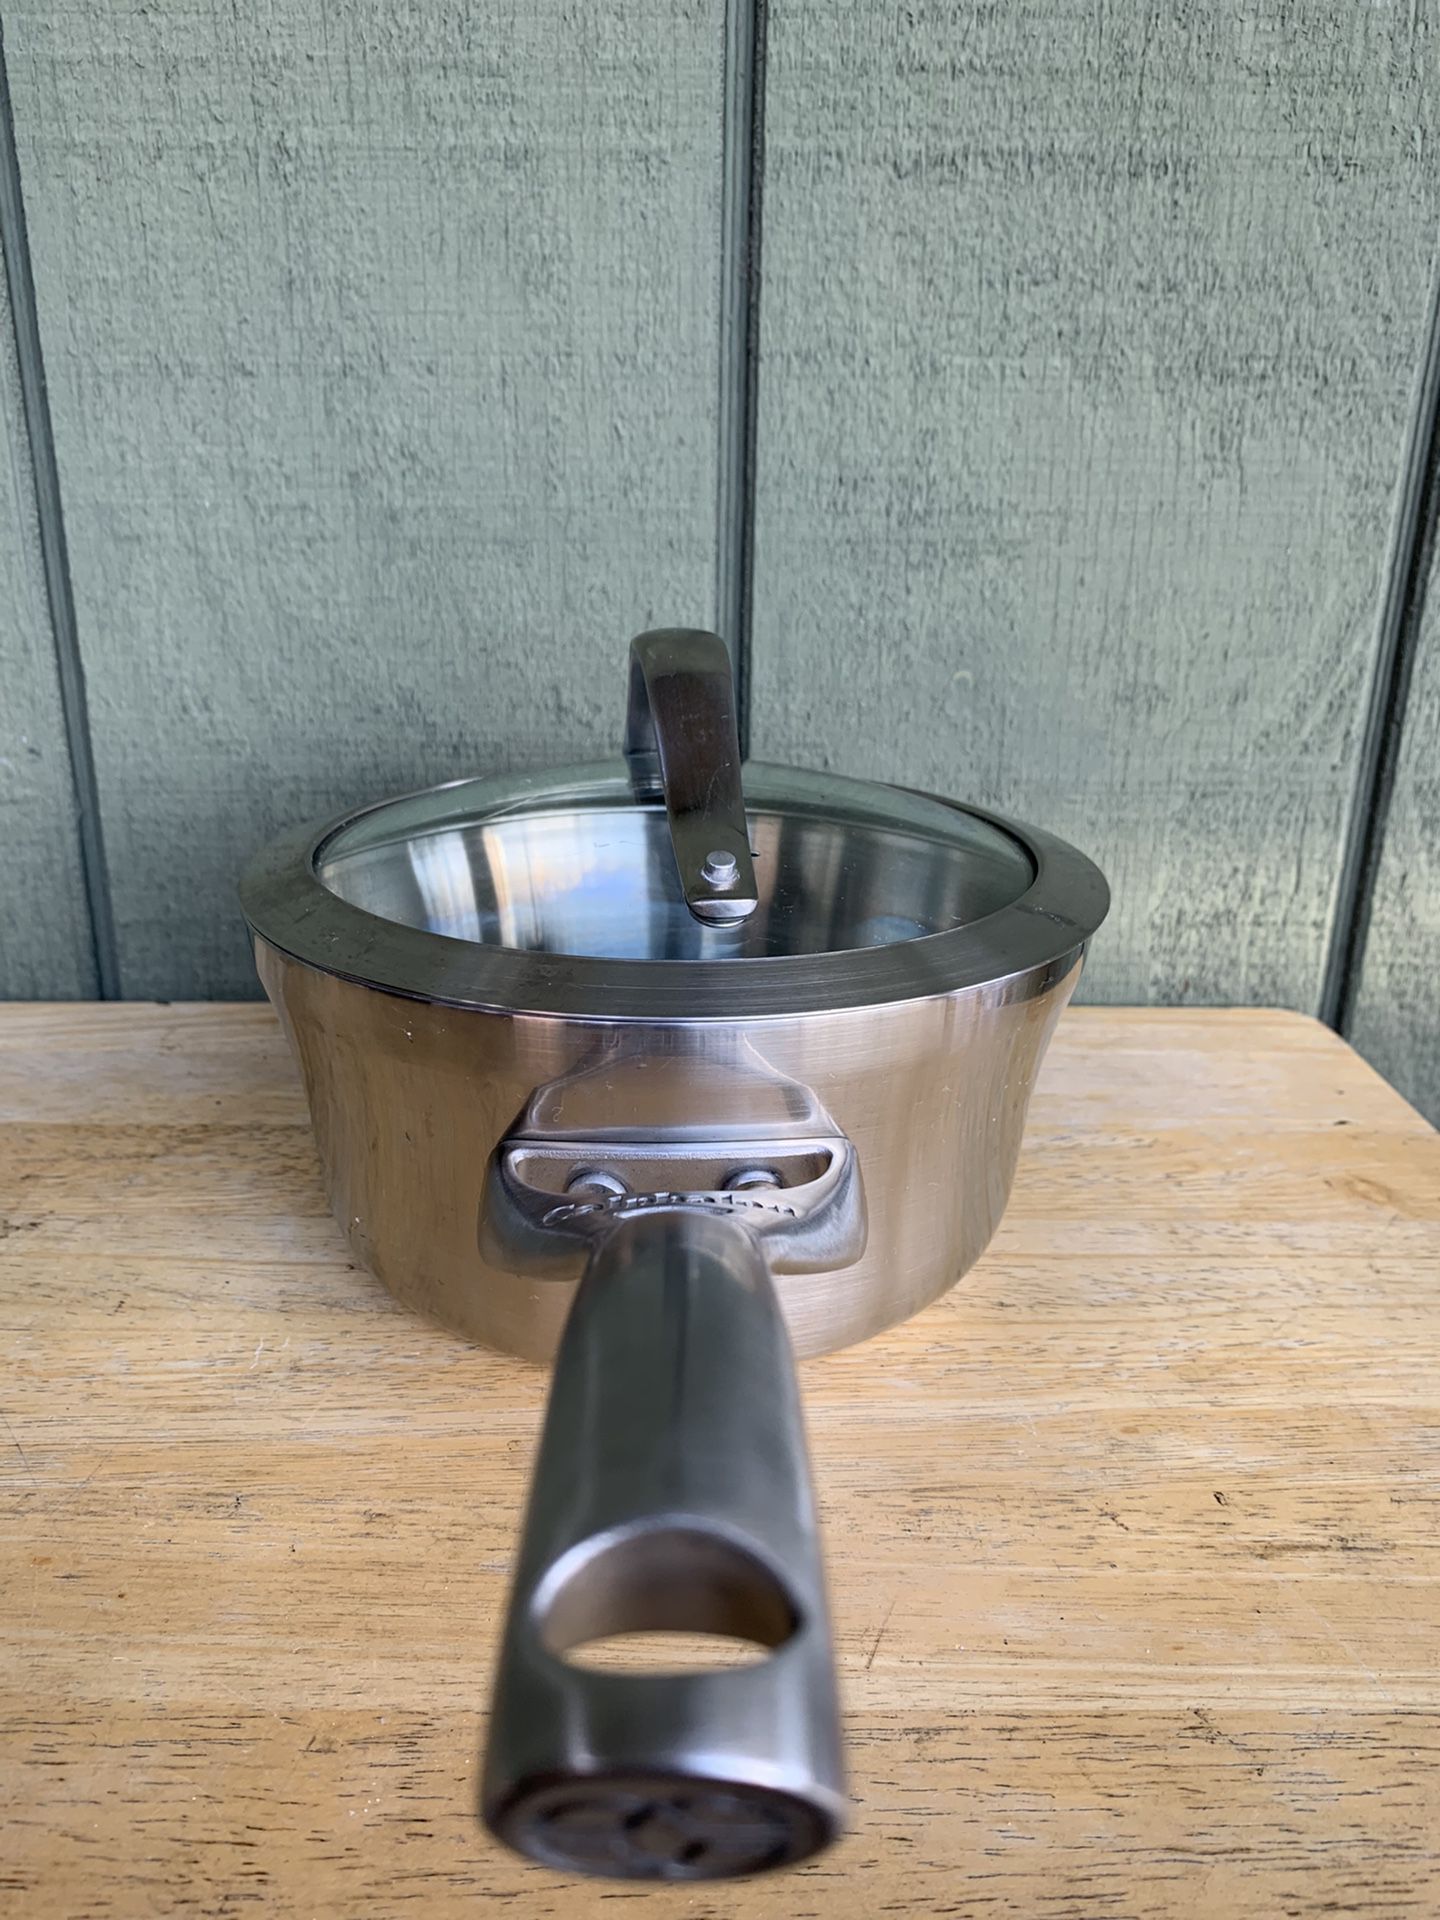 Delmonico's 1.75 Quart Stainless Steel Saucepan with Pour Spout & Lid for  Sale in Jersey City, NJ - OfferUp